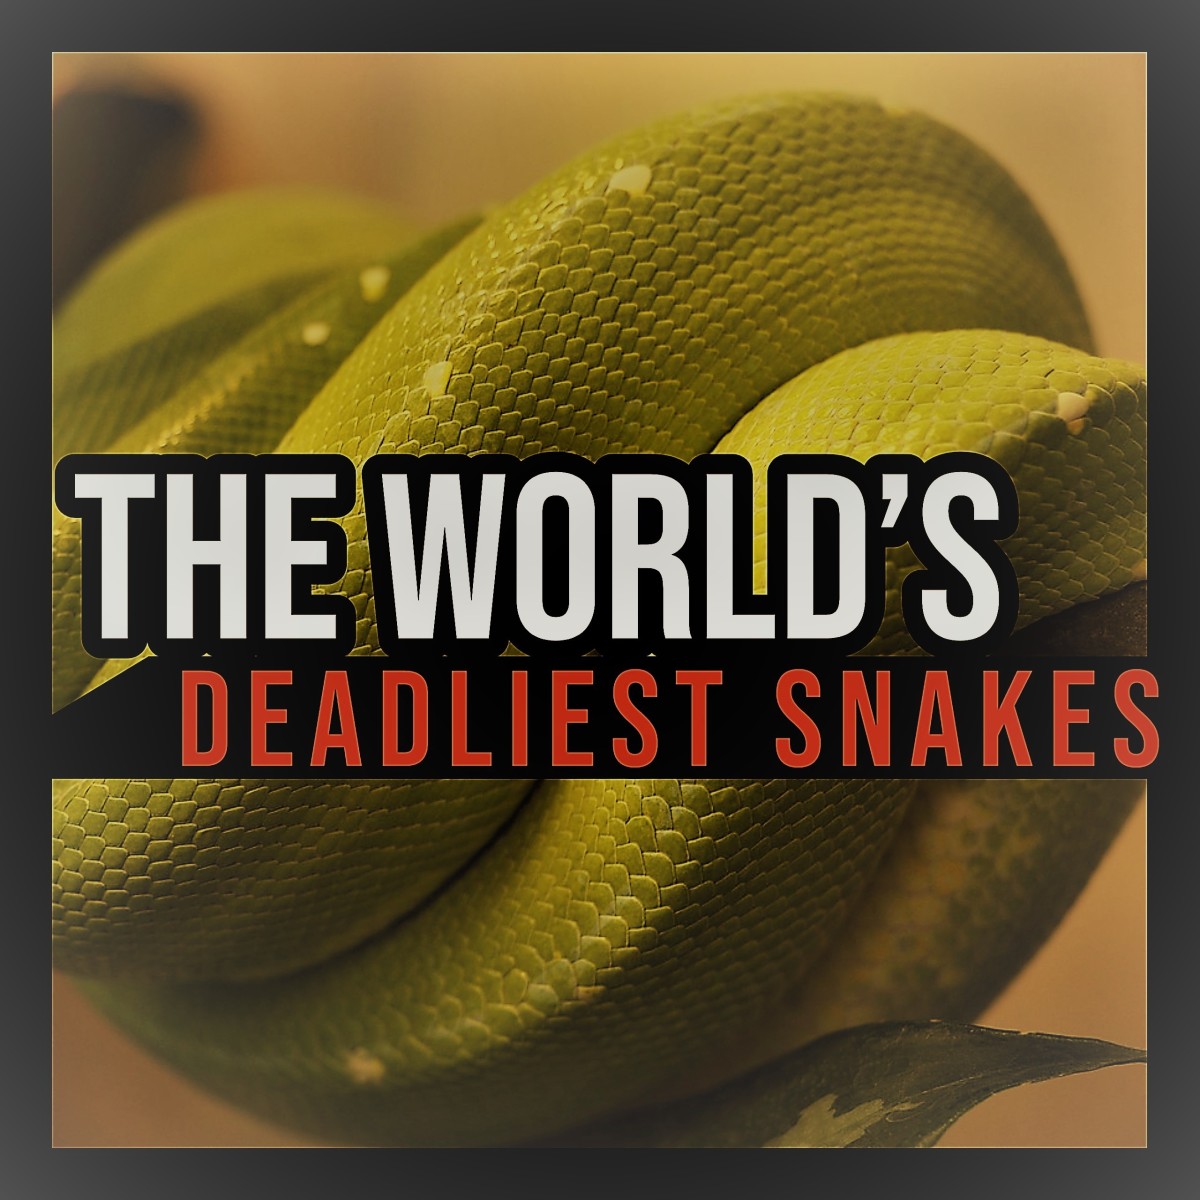 From the Mojave green rattlesnake to the black mamba, this article ranks the 25 deadliest snakes known to currently exist worldwide.